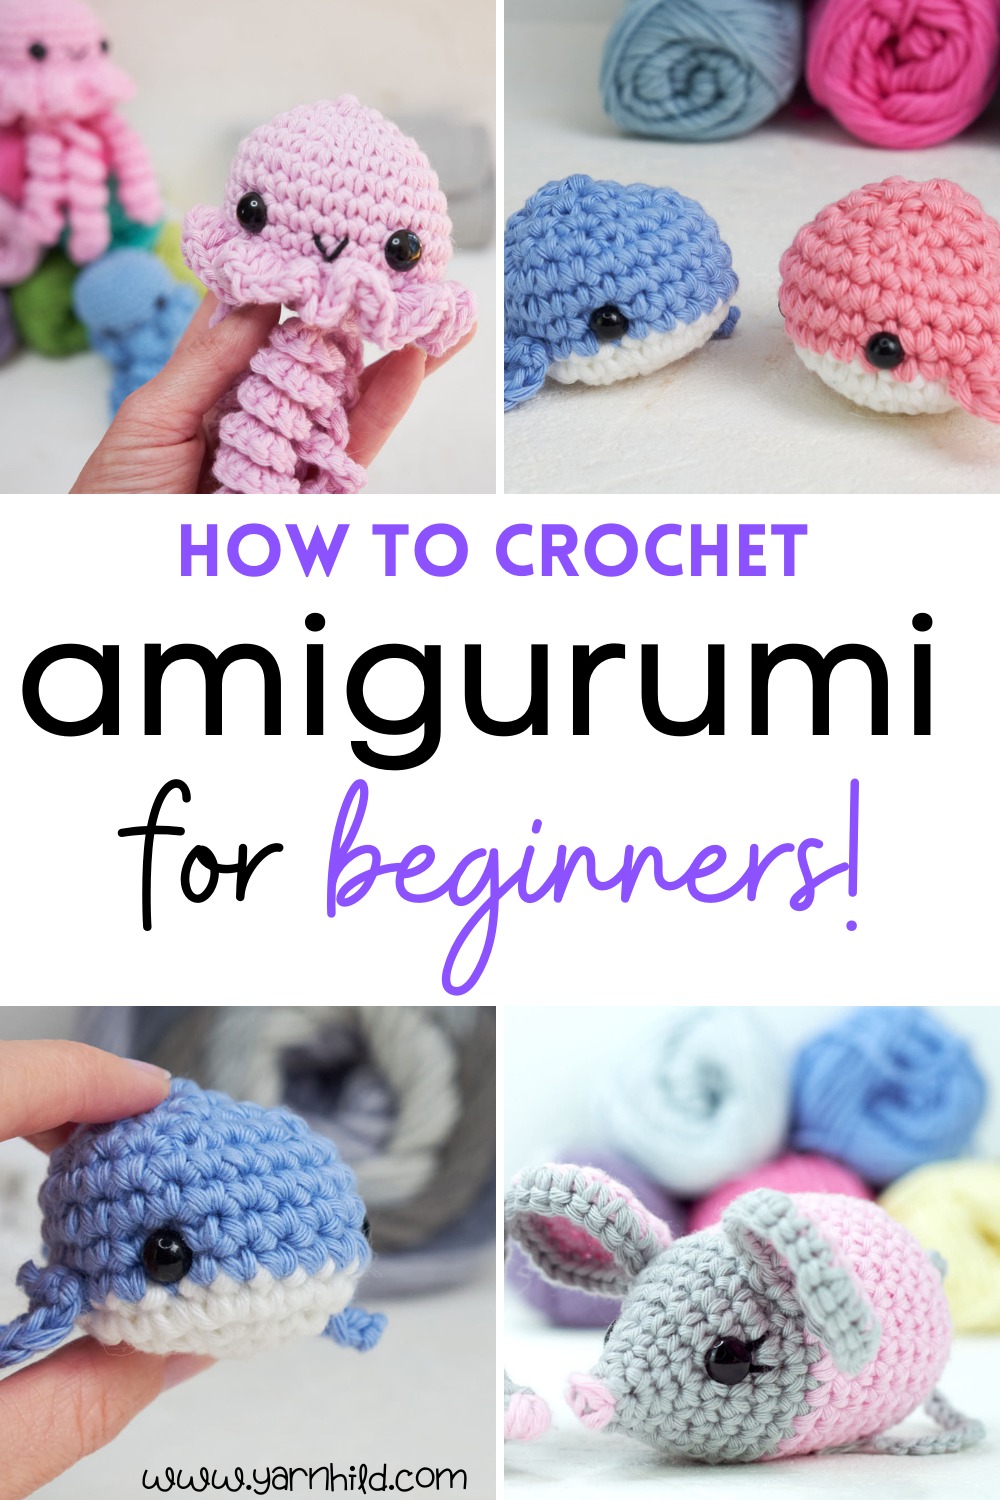 how-to-crochet-amigurumi-for-absolute-beginners